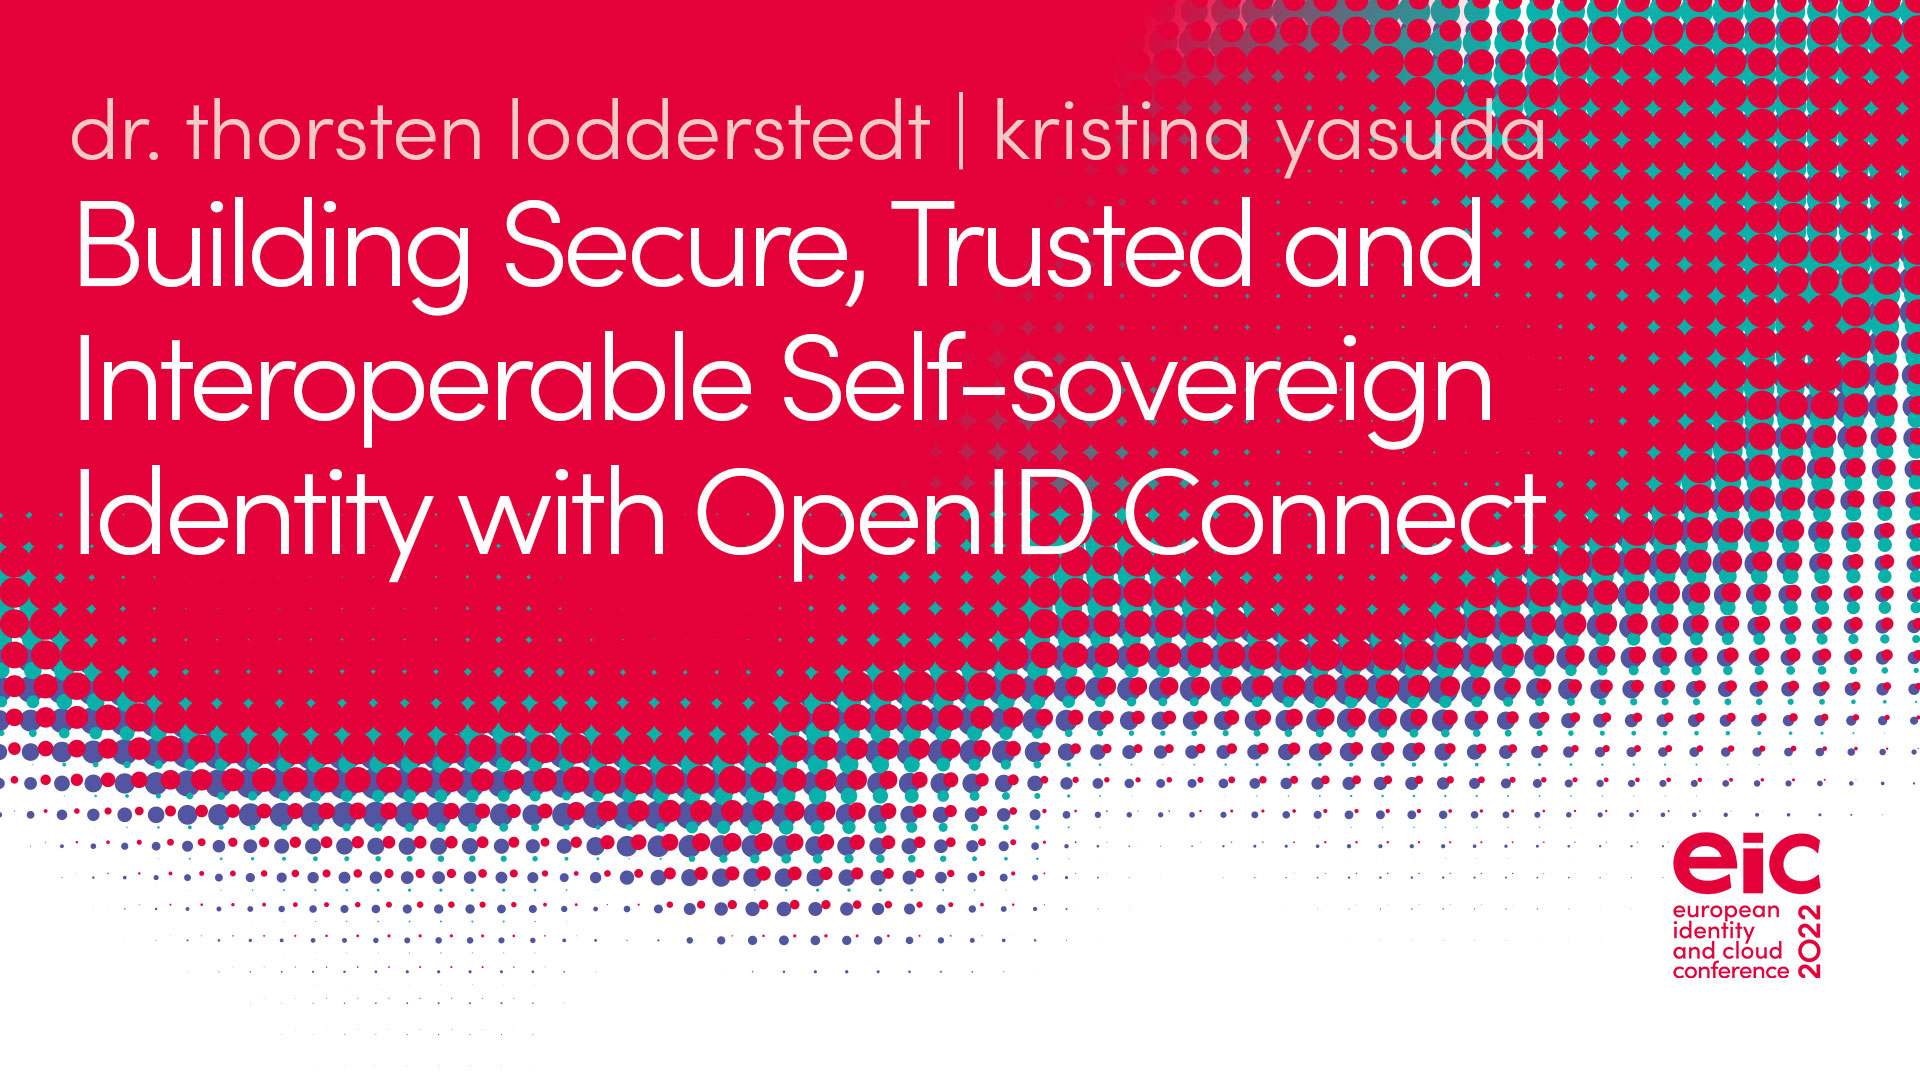 Building Secure, Trusted and Interoperable Self-sovereign Identity with OpenID Connect